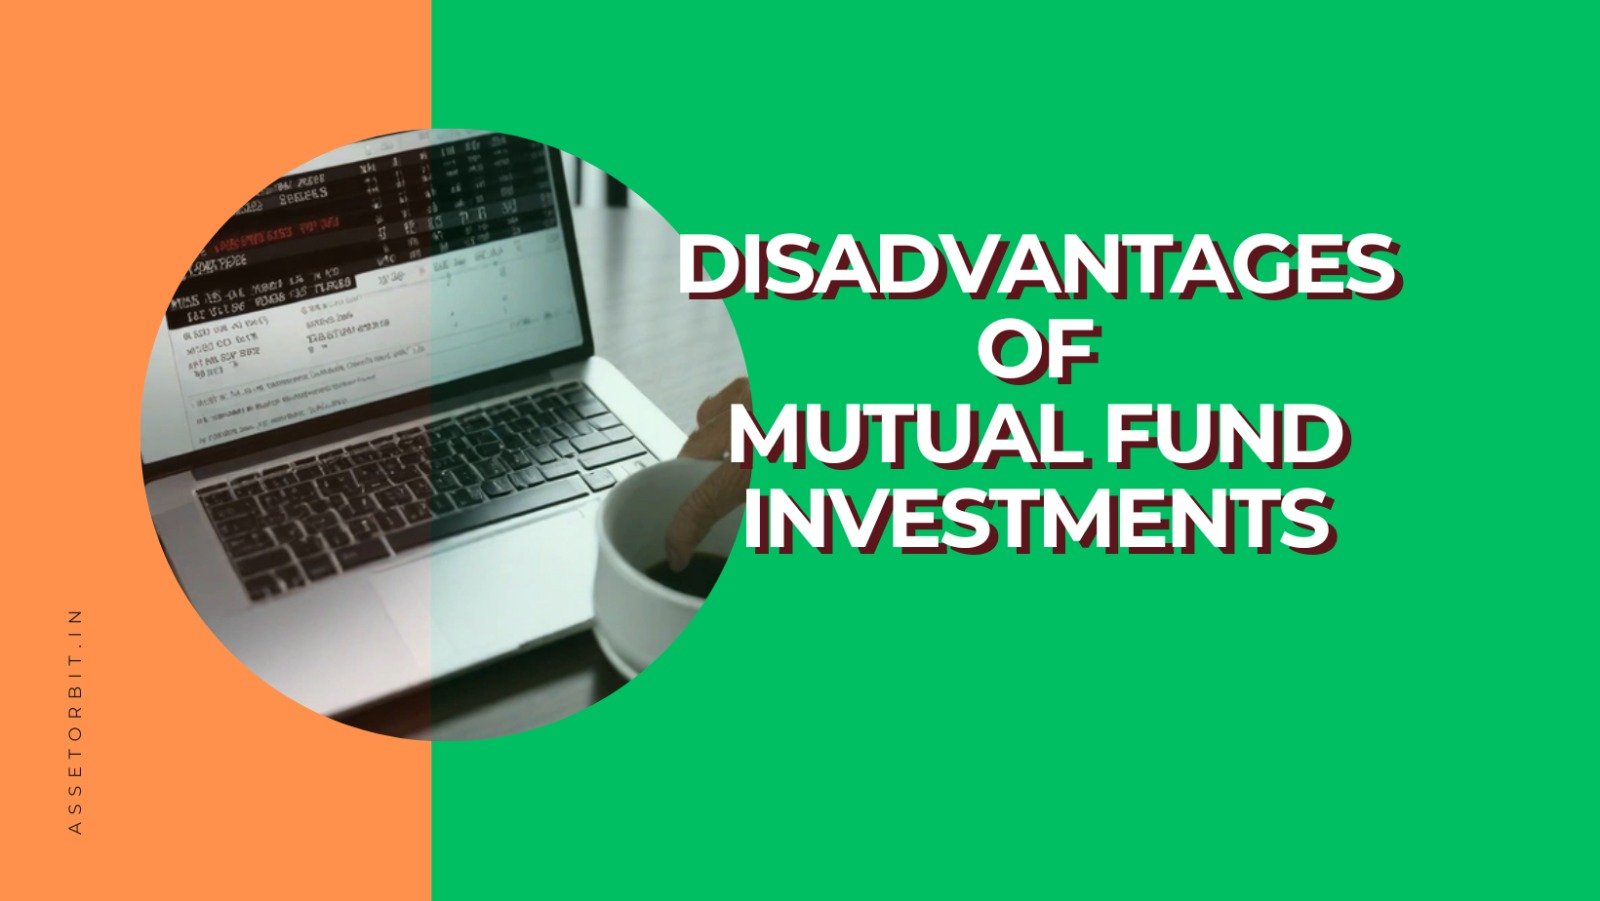 Disadvantages of Mutual Fund